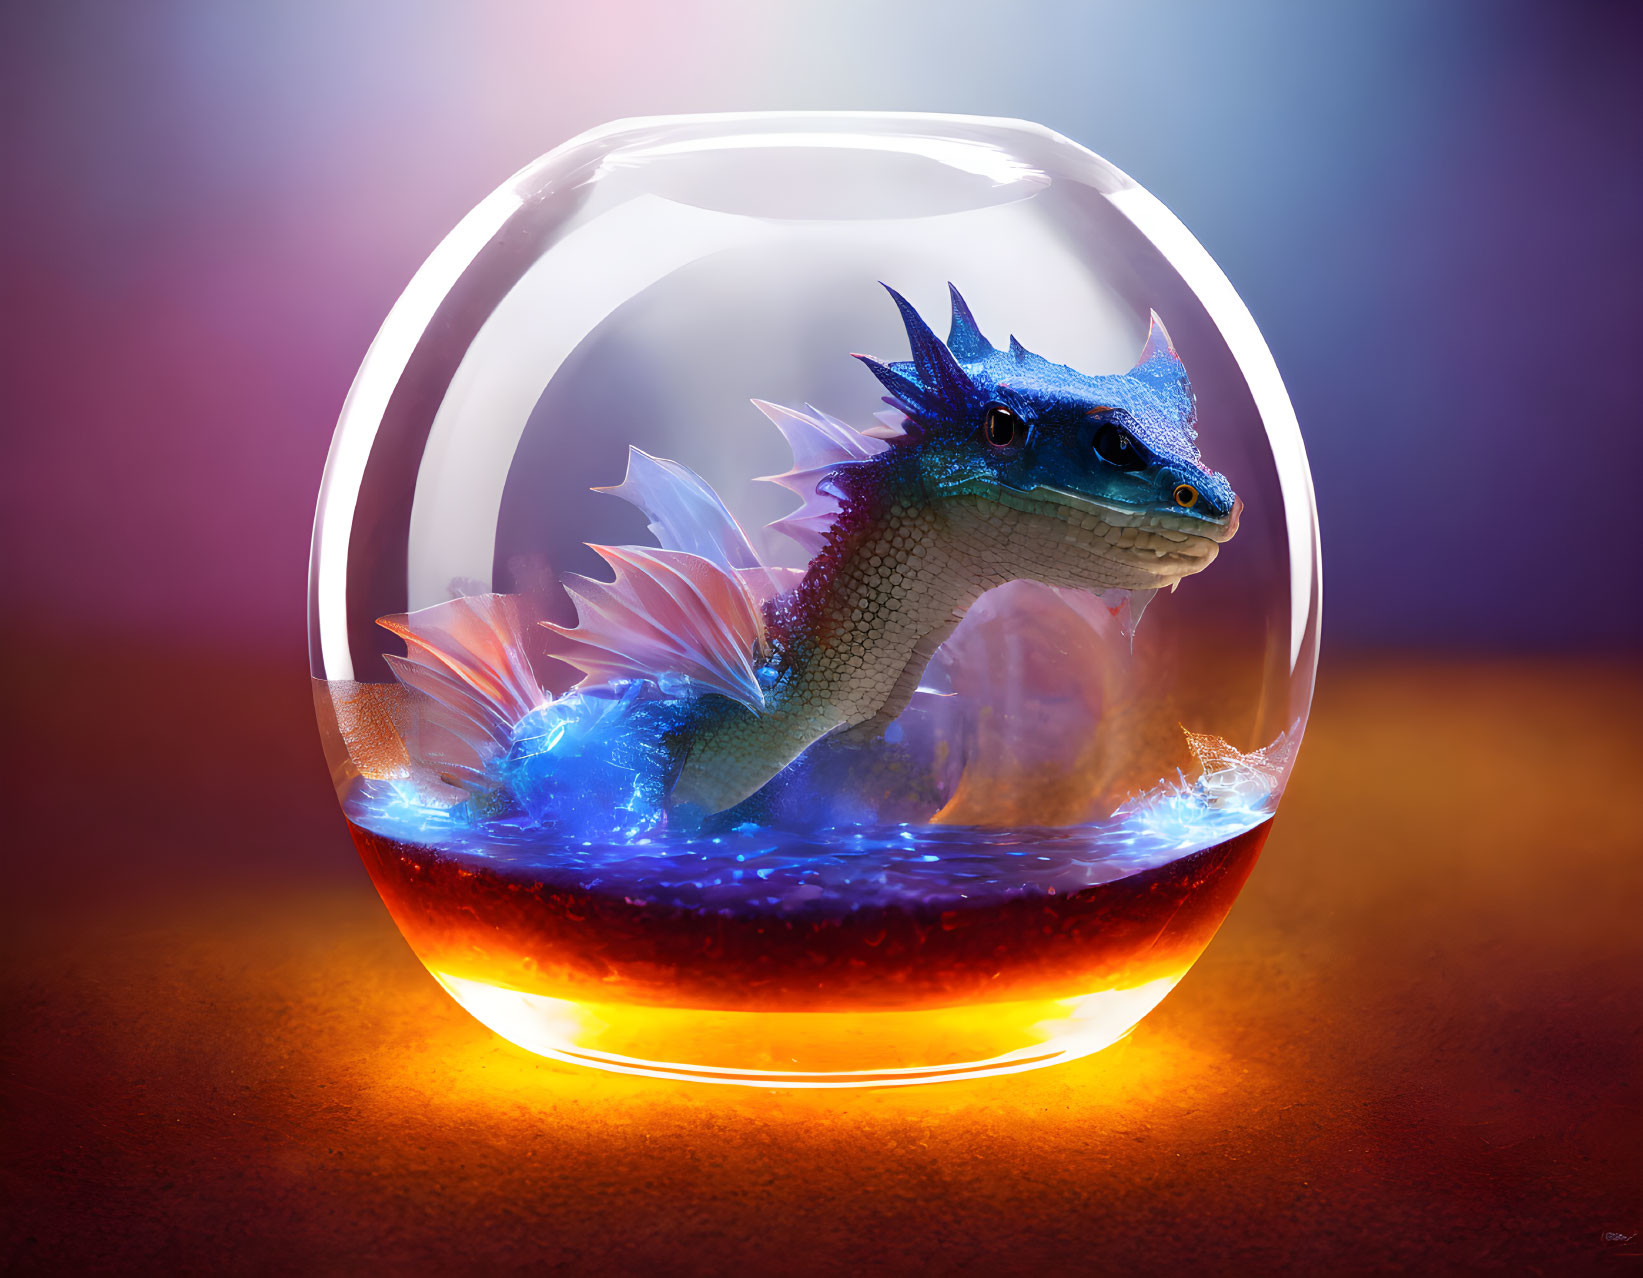 Blue dragon in glass sphere with fiery base on gradient background